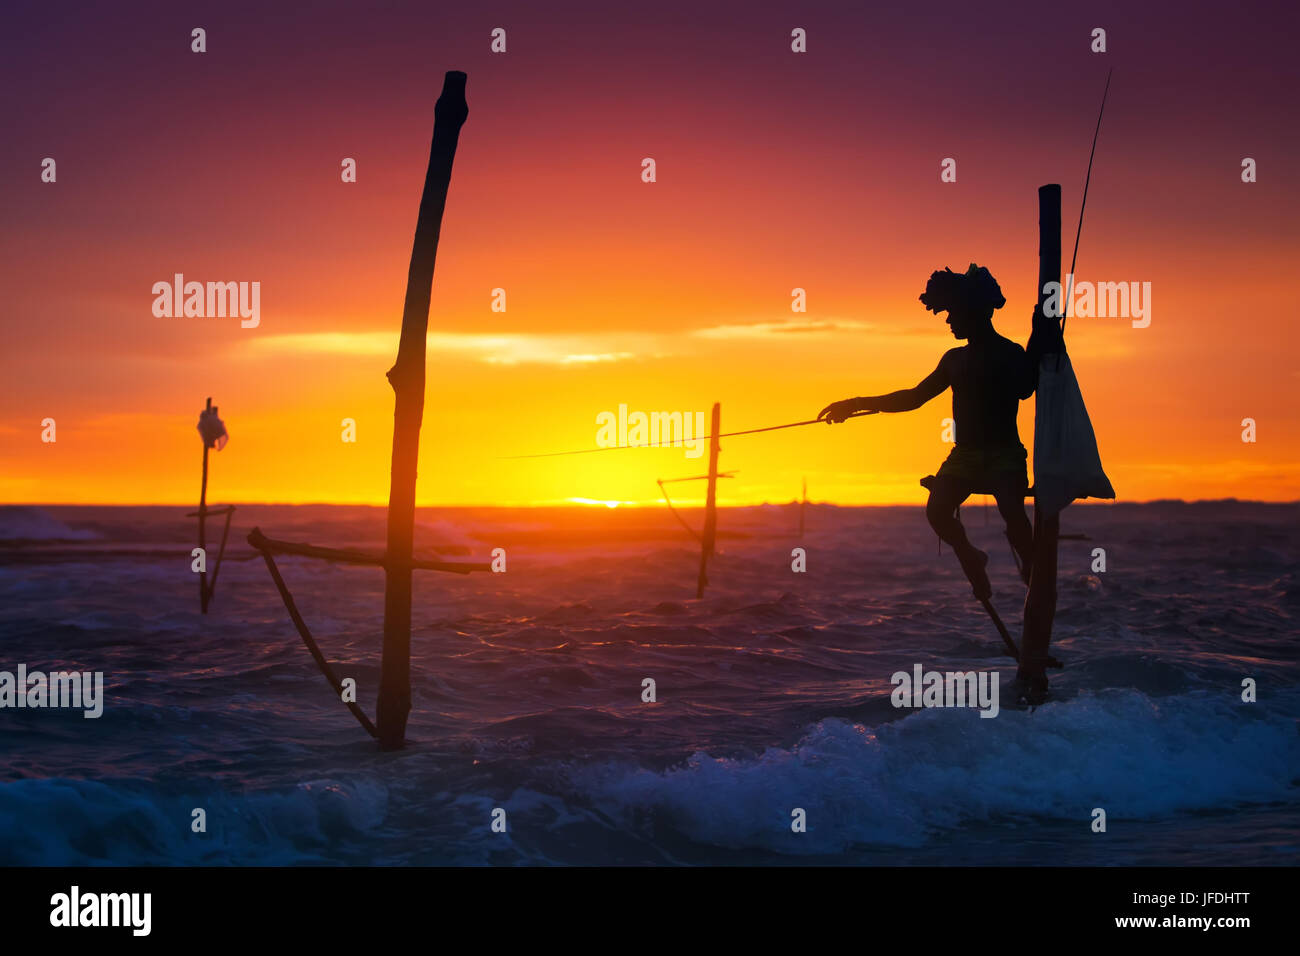 Sri Lanka's Stilt Fisherman. Fishing on stilt is very common in many Asian countries, but most of all - in Sri Lanka, in the Ahangama village. Stock Photo